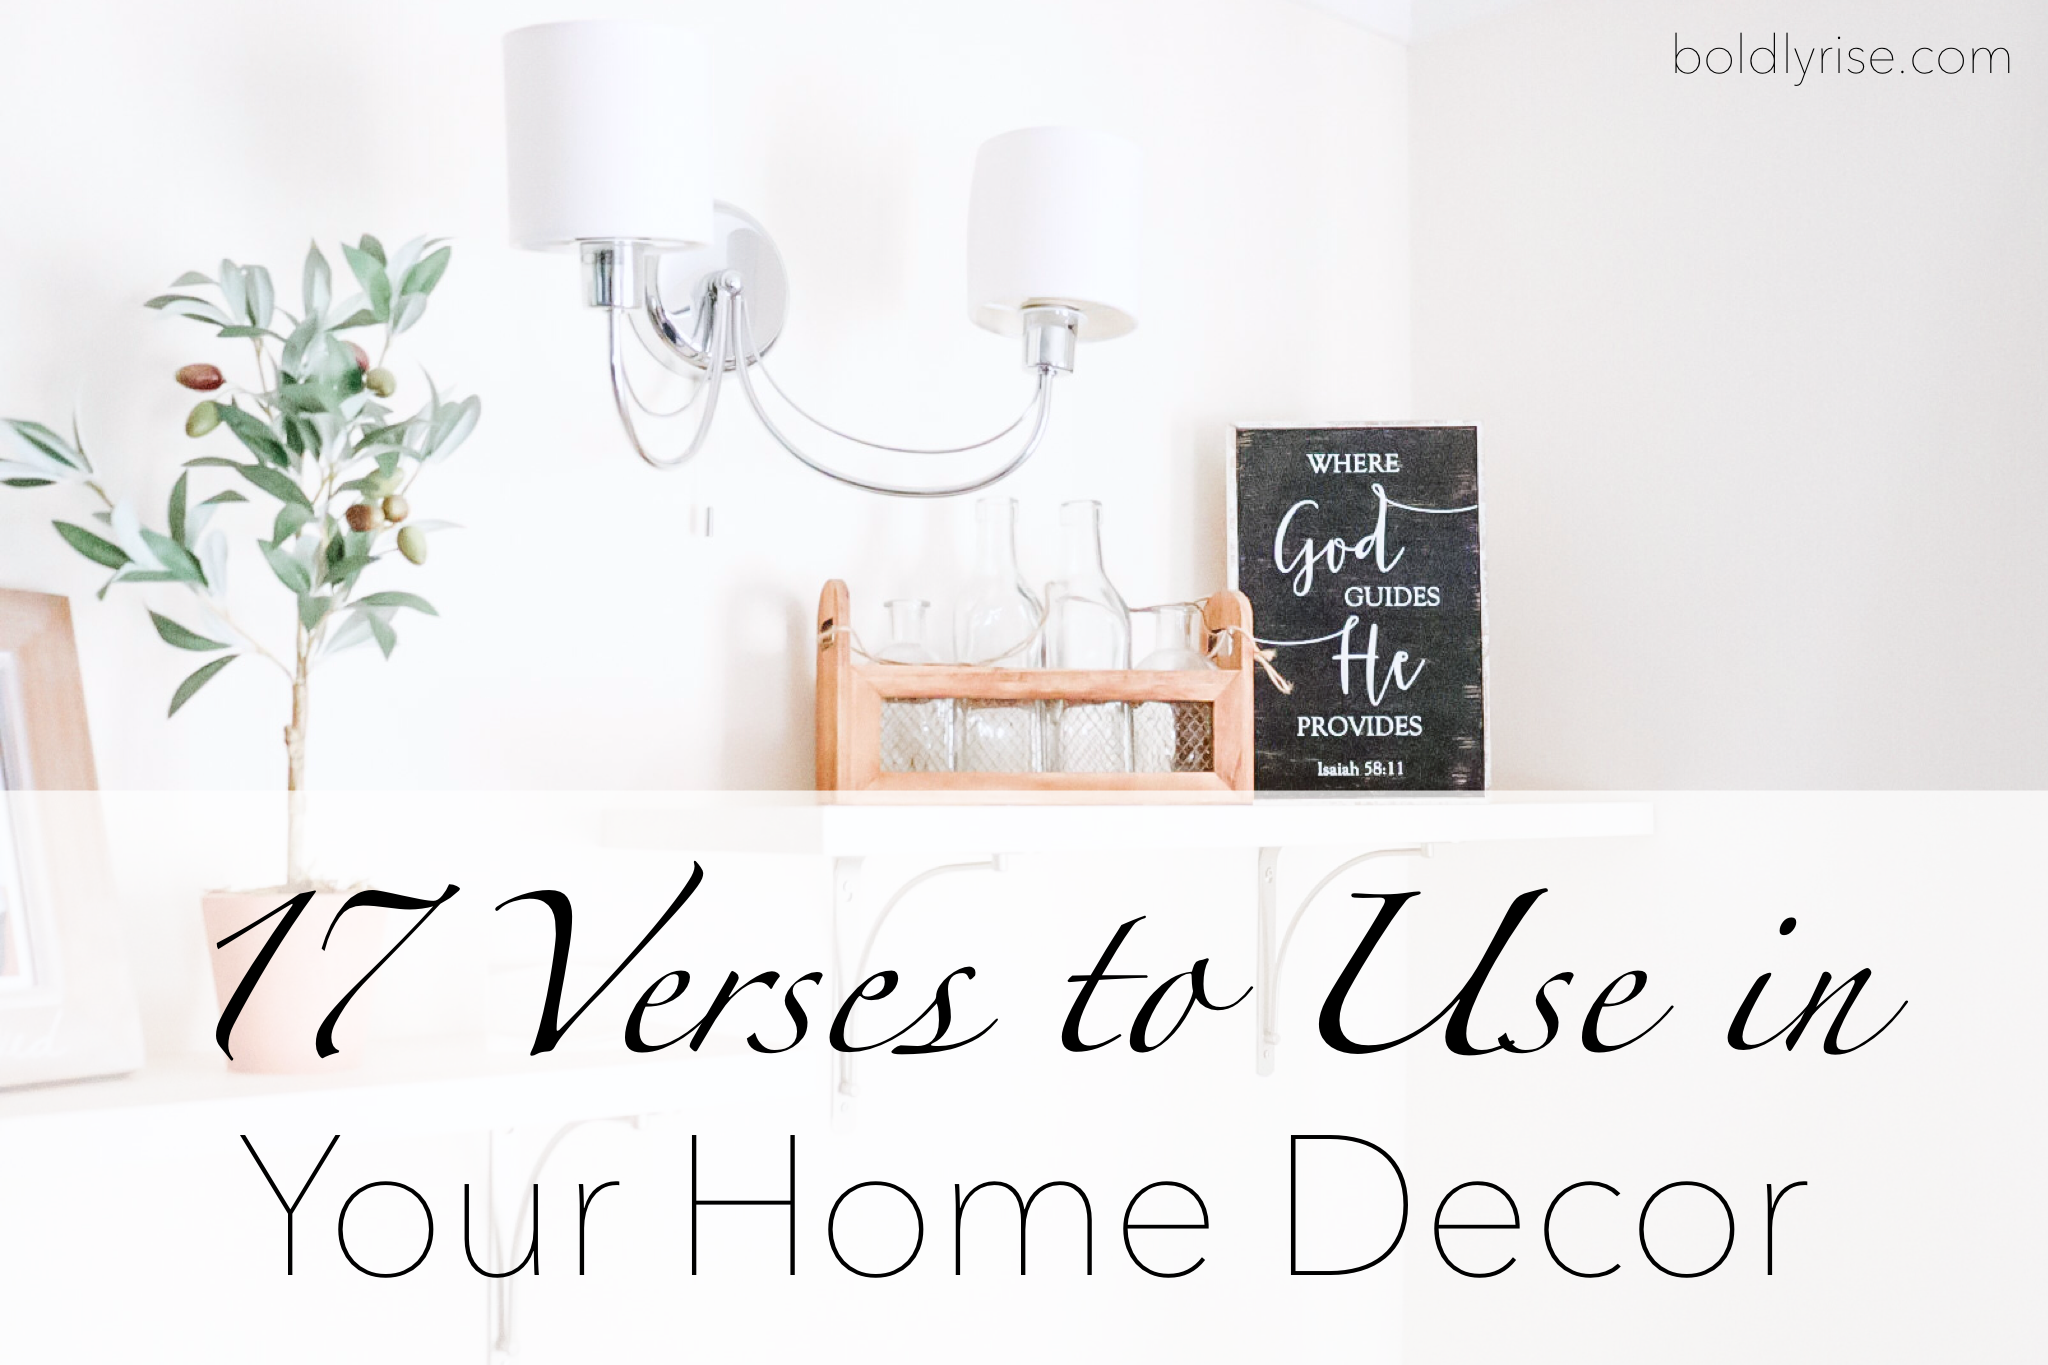 17 Verses to Use in Your Home Decor - Boldly Rise